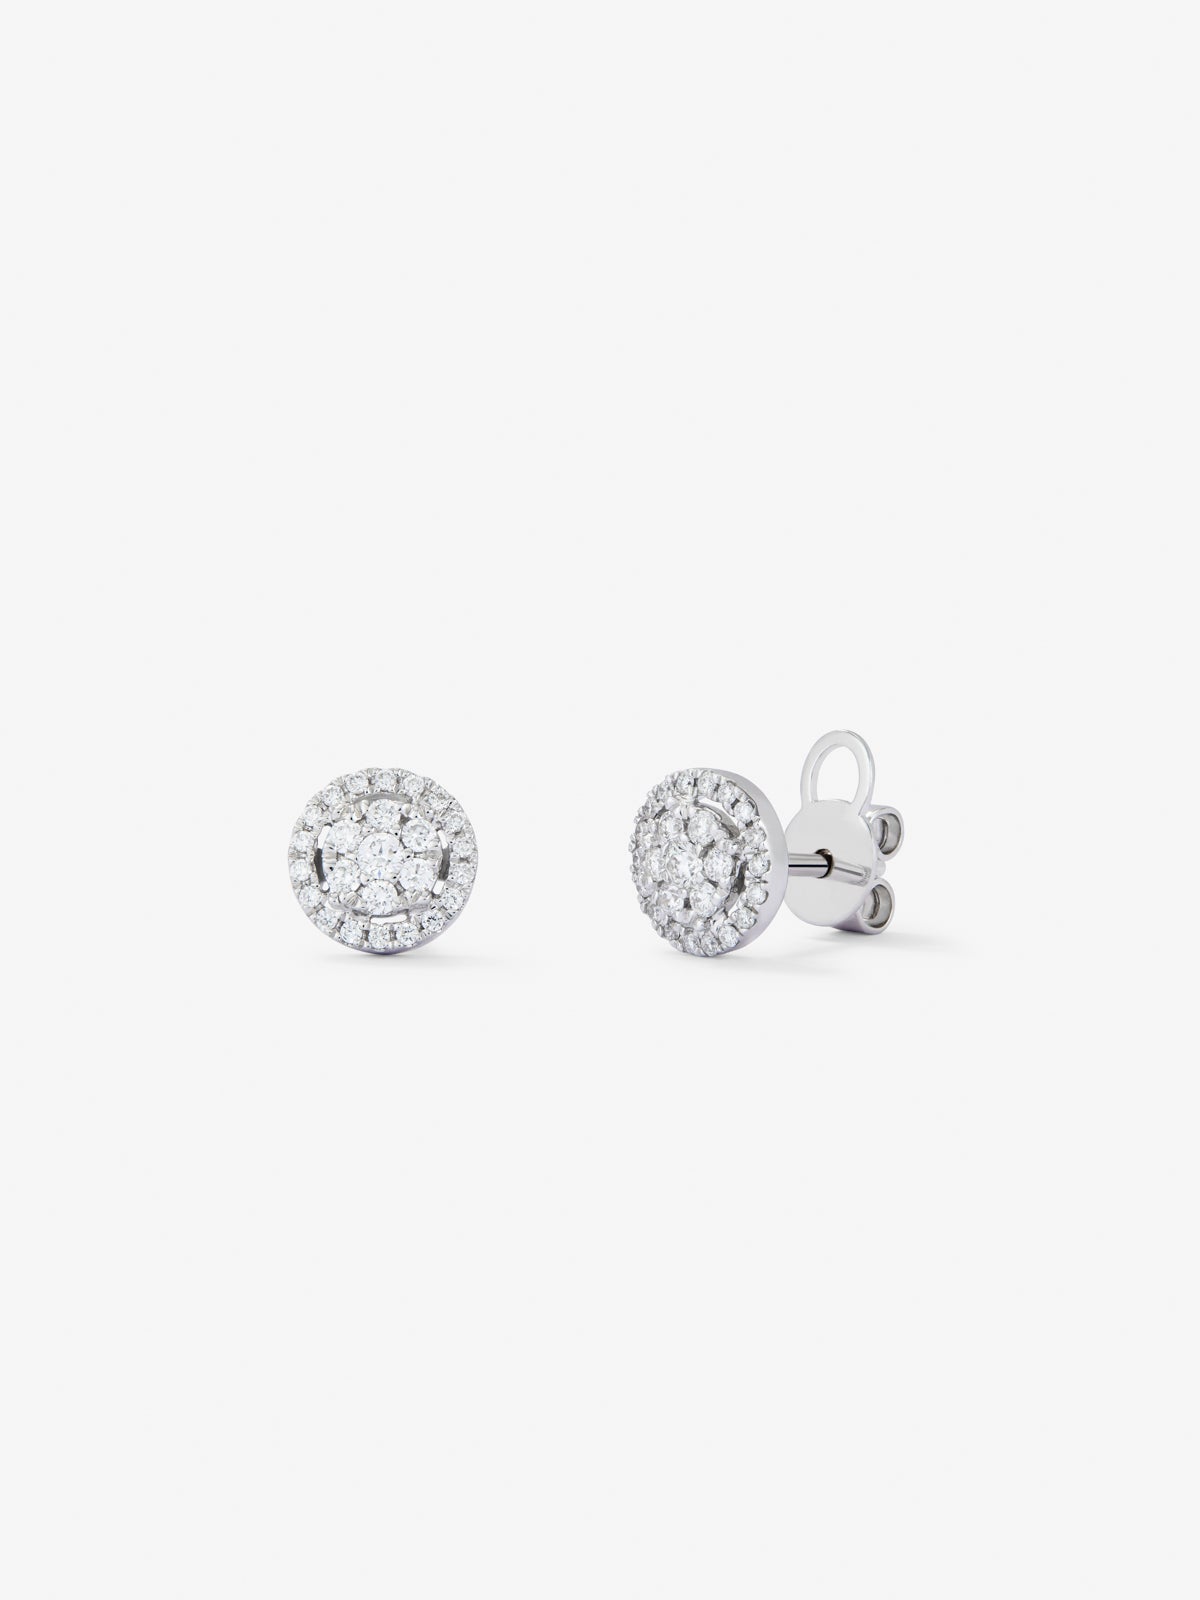 18K white gold earrings with diamonds